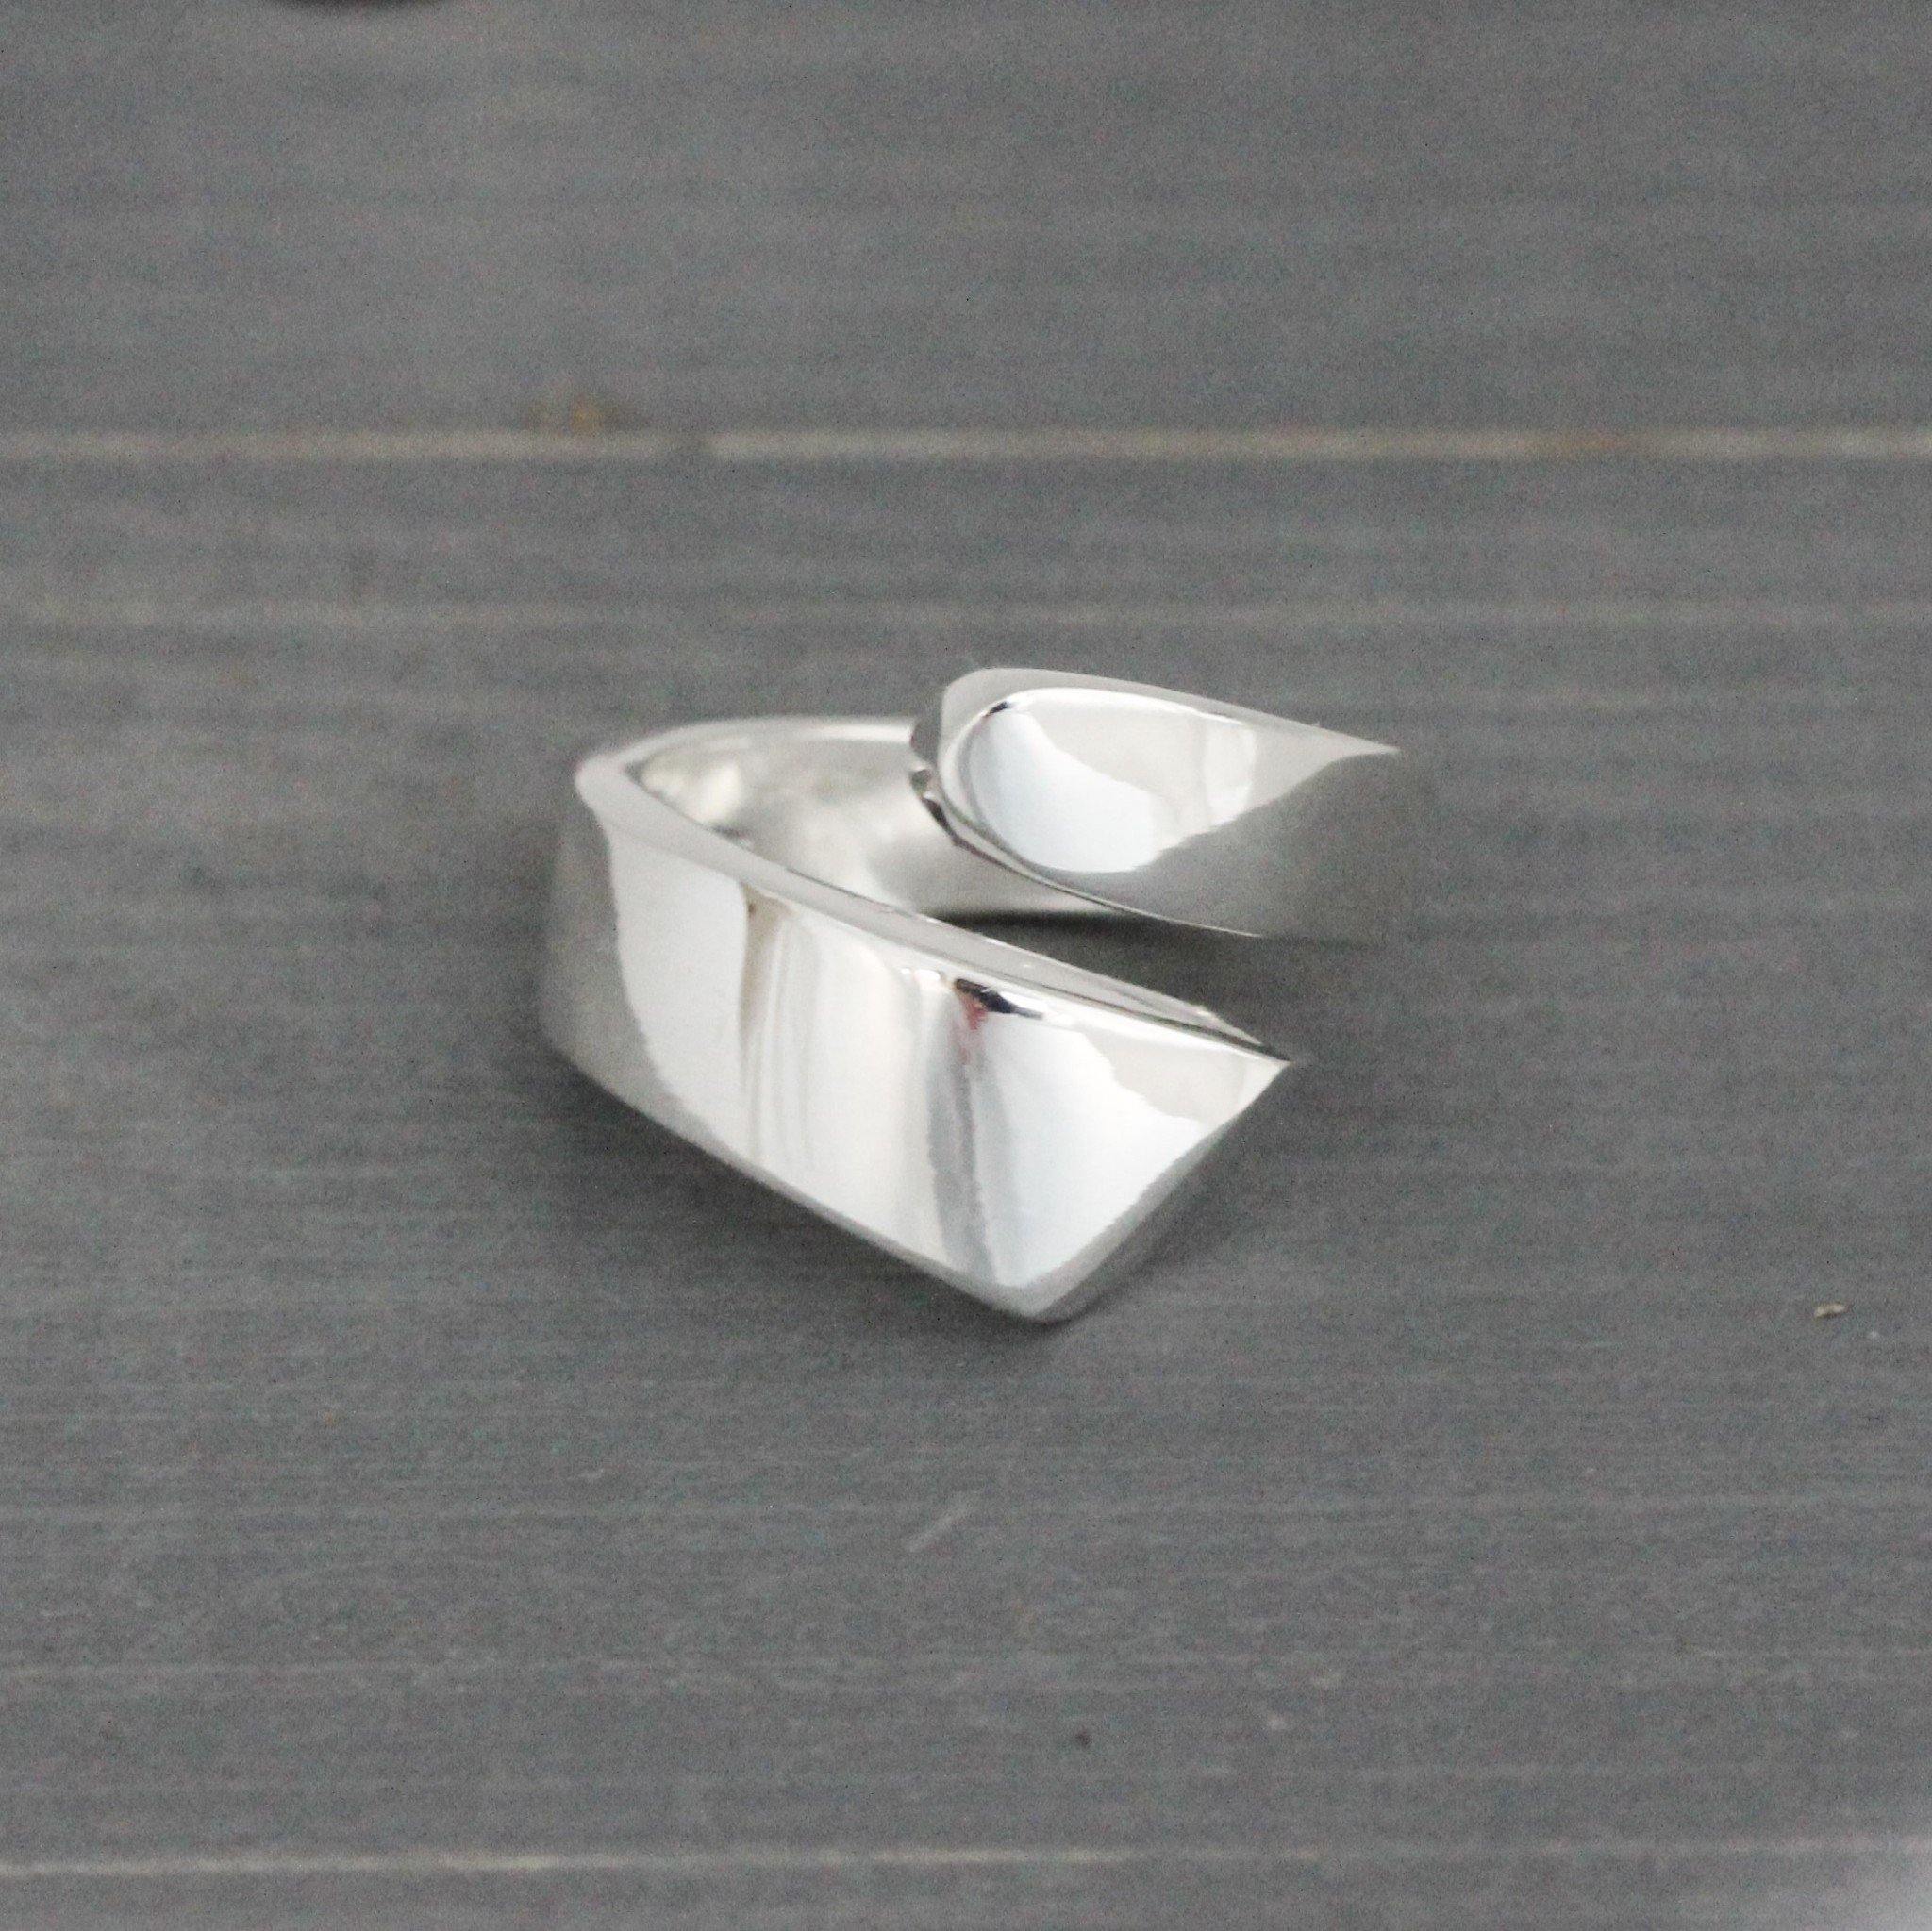 Sterling Silver Modern Contemporary Asymmetrical Adjustable Ring - STERLING SILVER DESIGNS